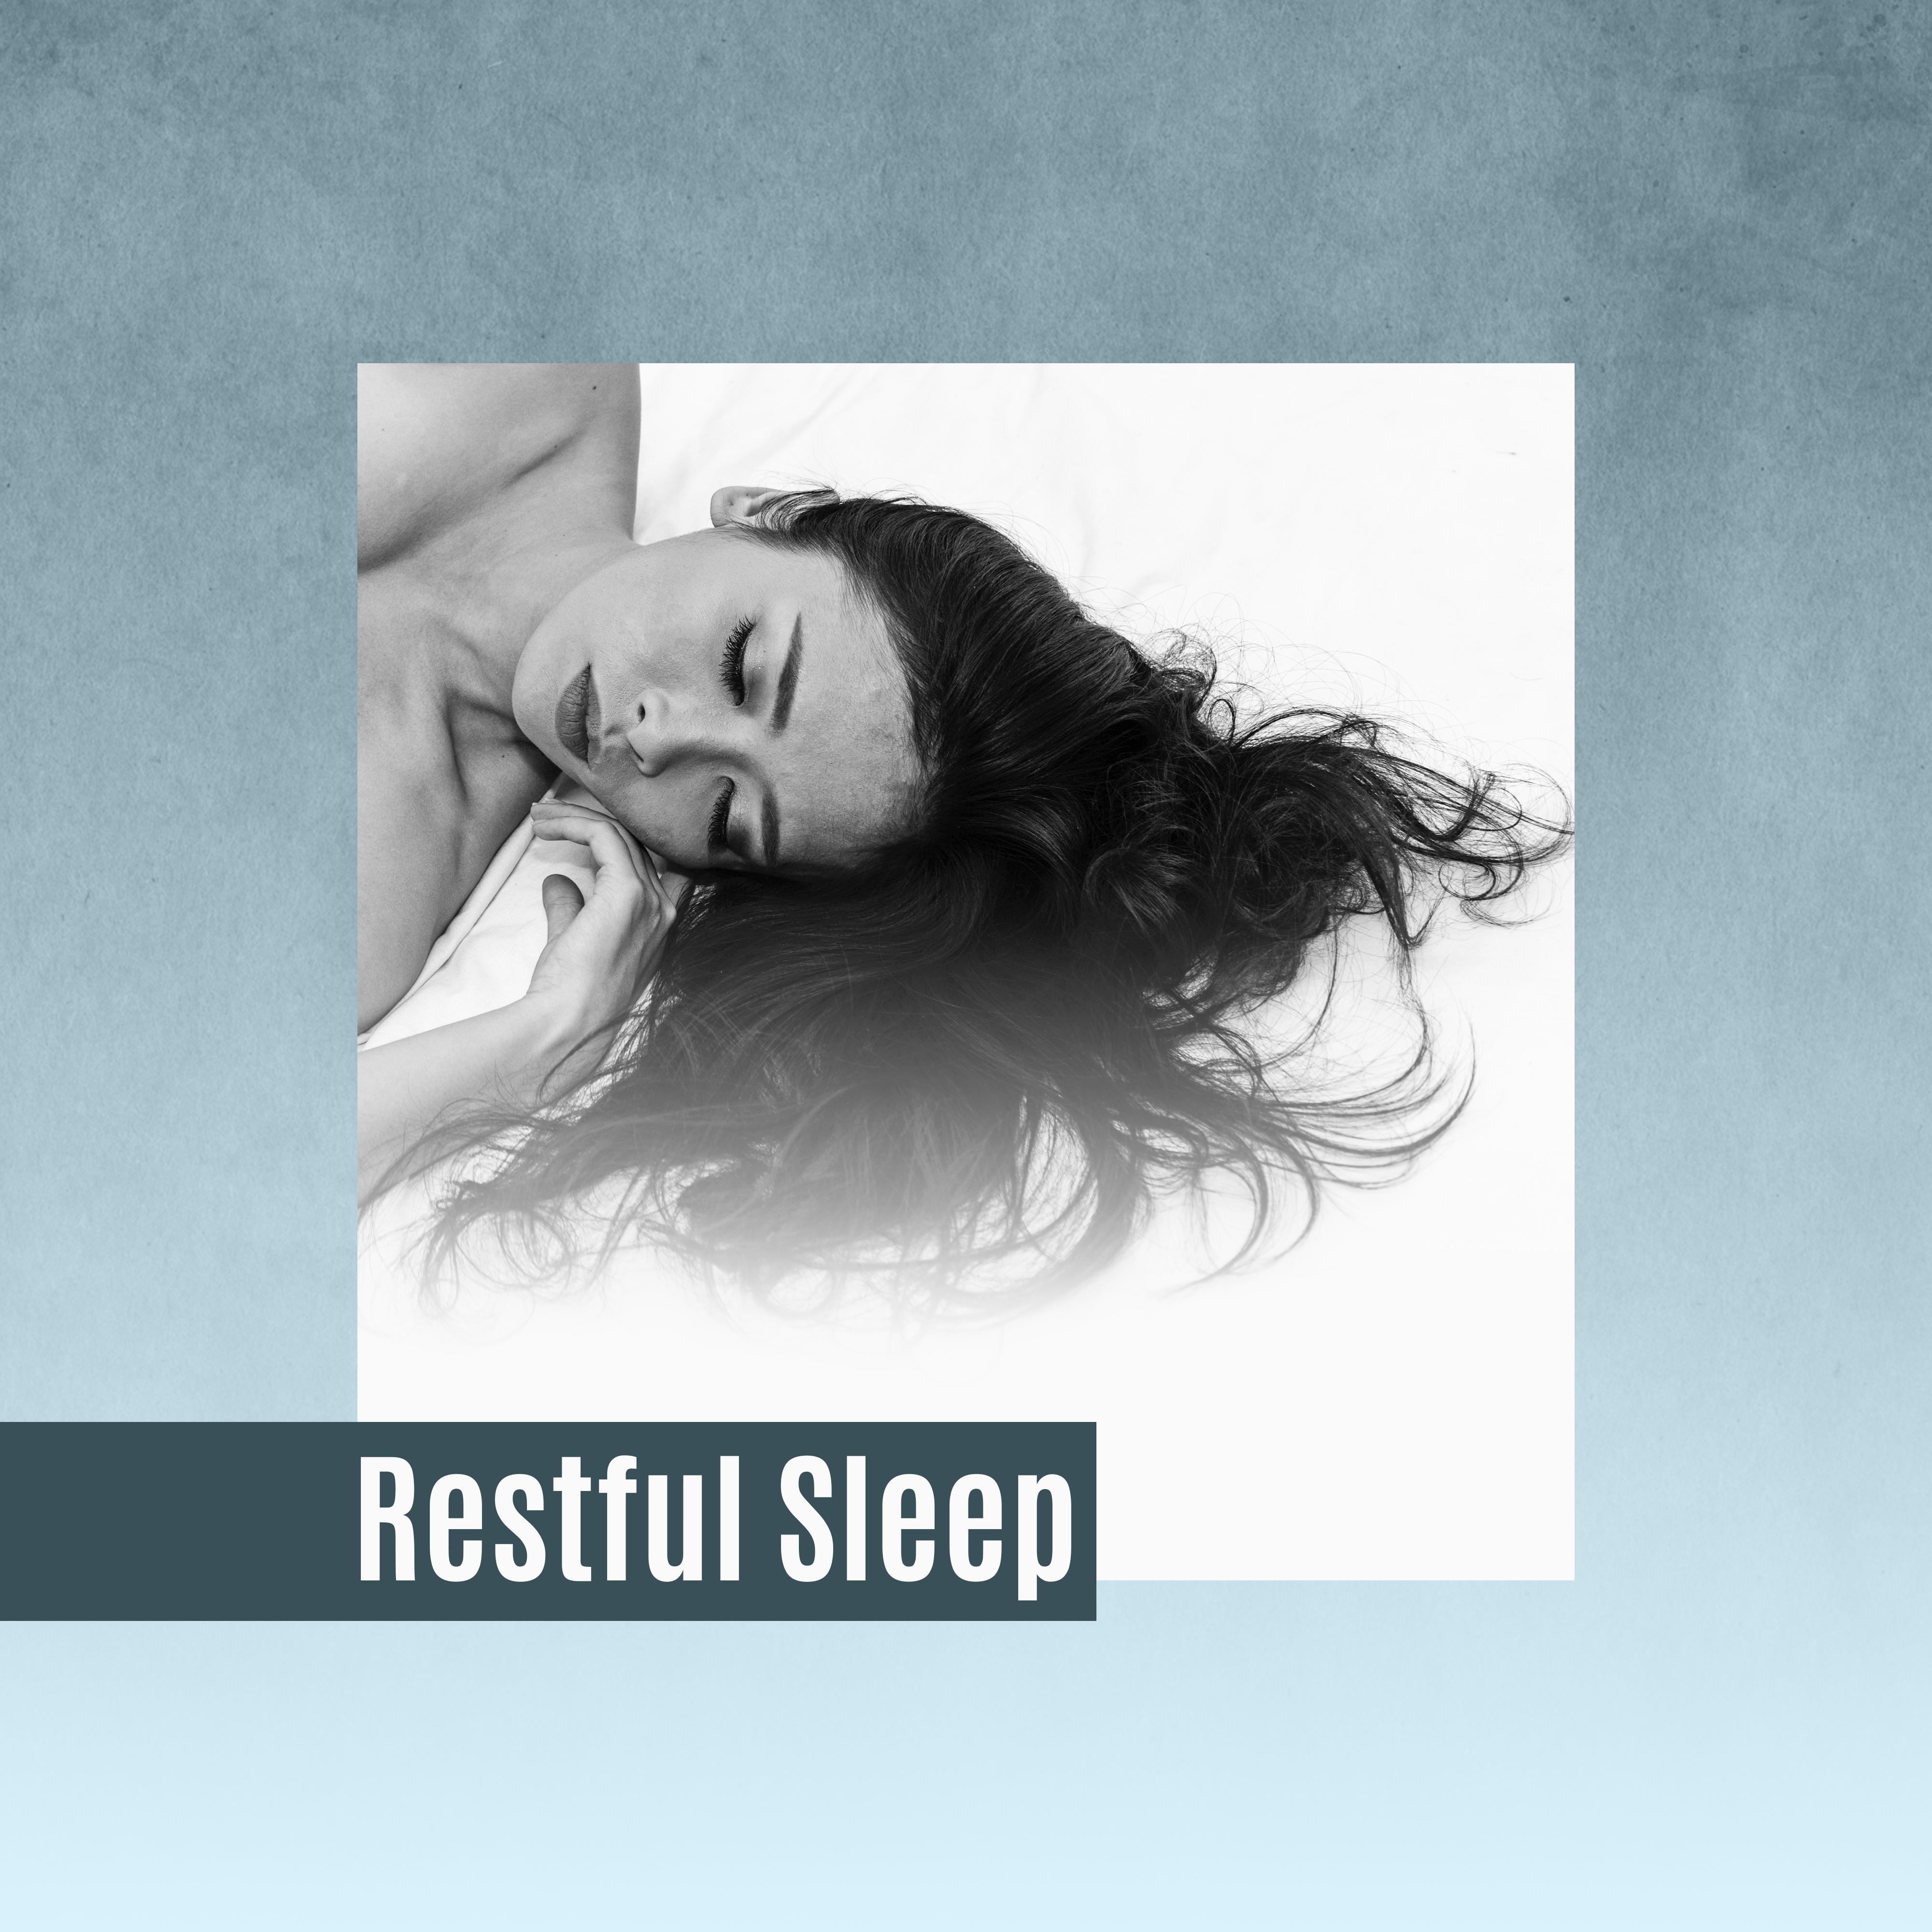 Restful Sleep – Soothing Music to Bed, Zen, Sounds of Water, Deep Sleep, Nature Sounds for Relaxation, Healing Lullabies